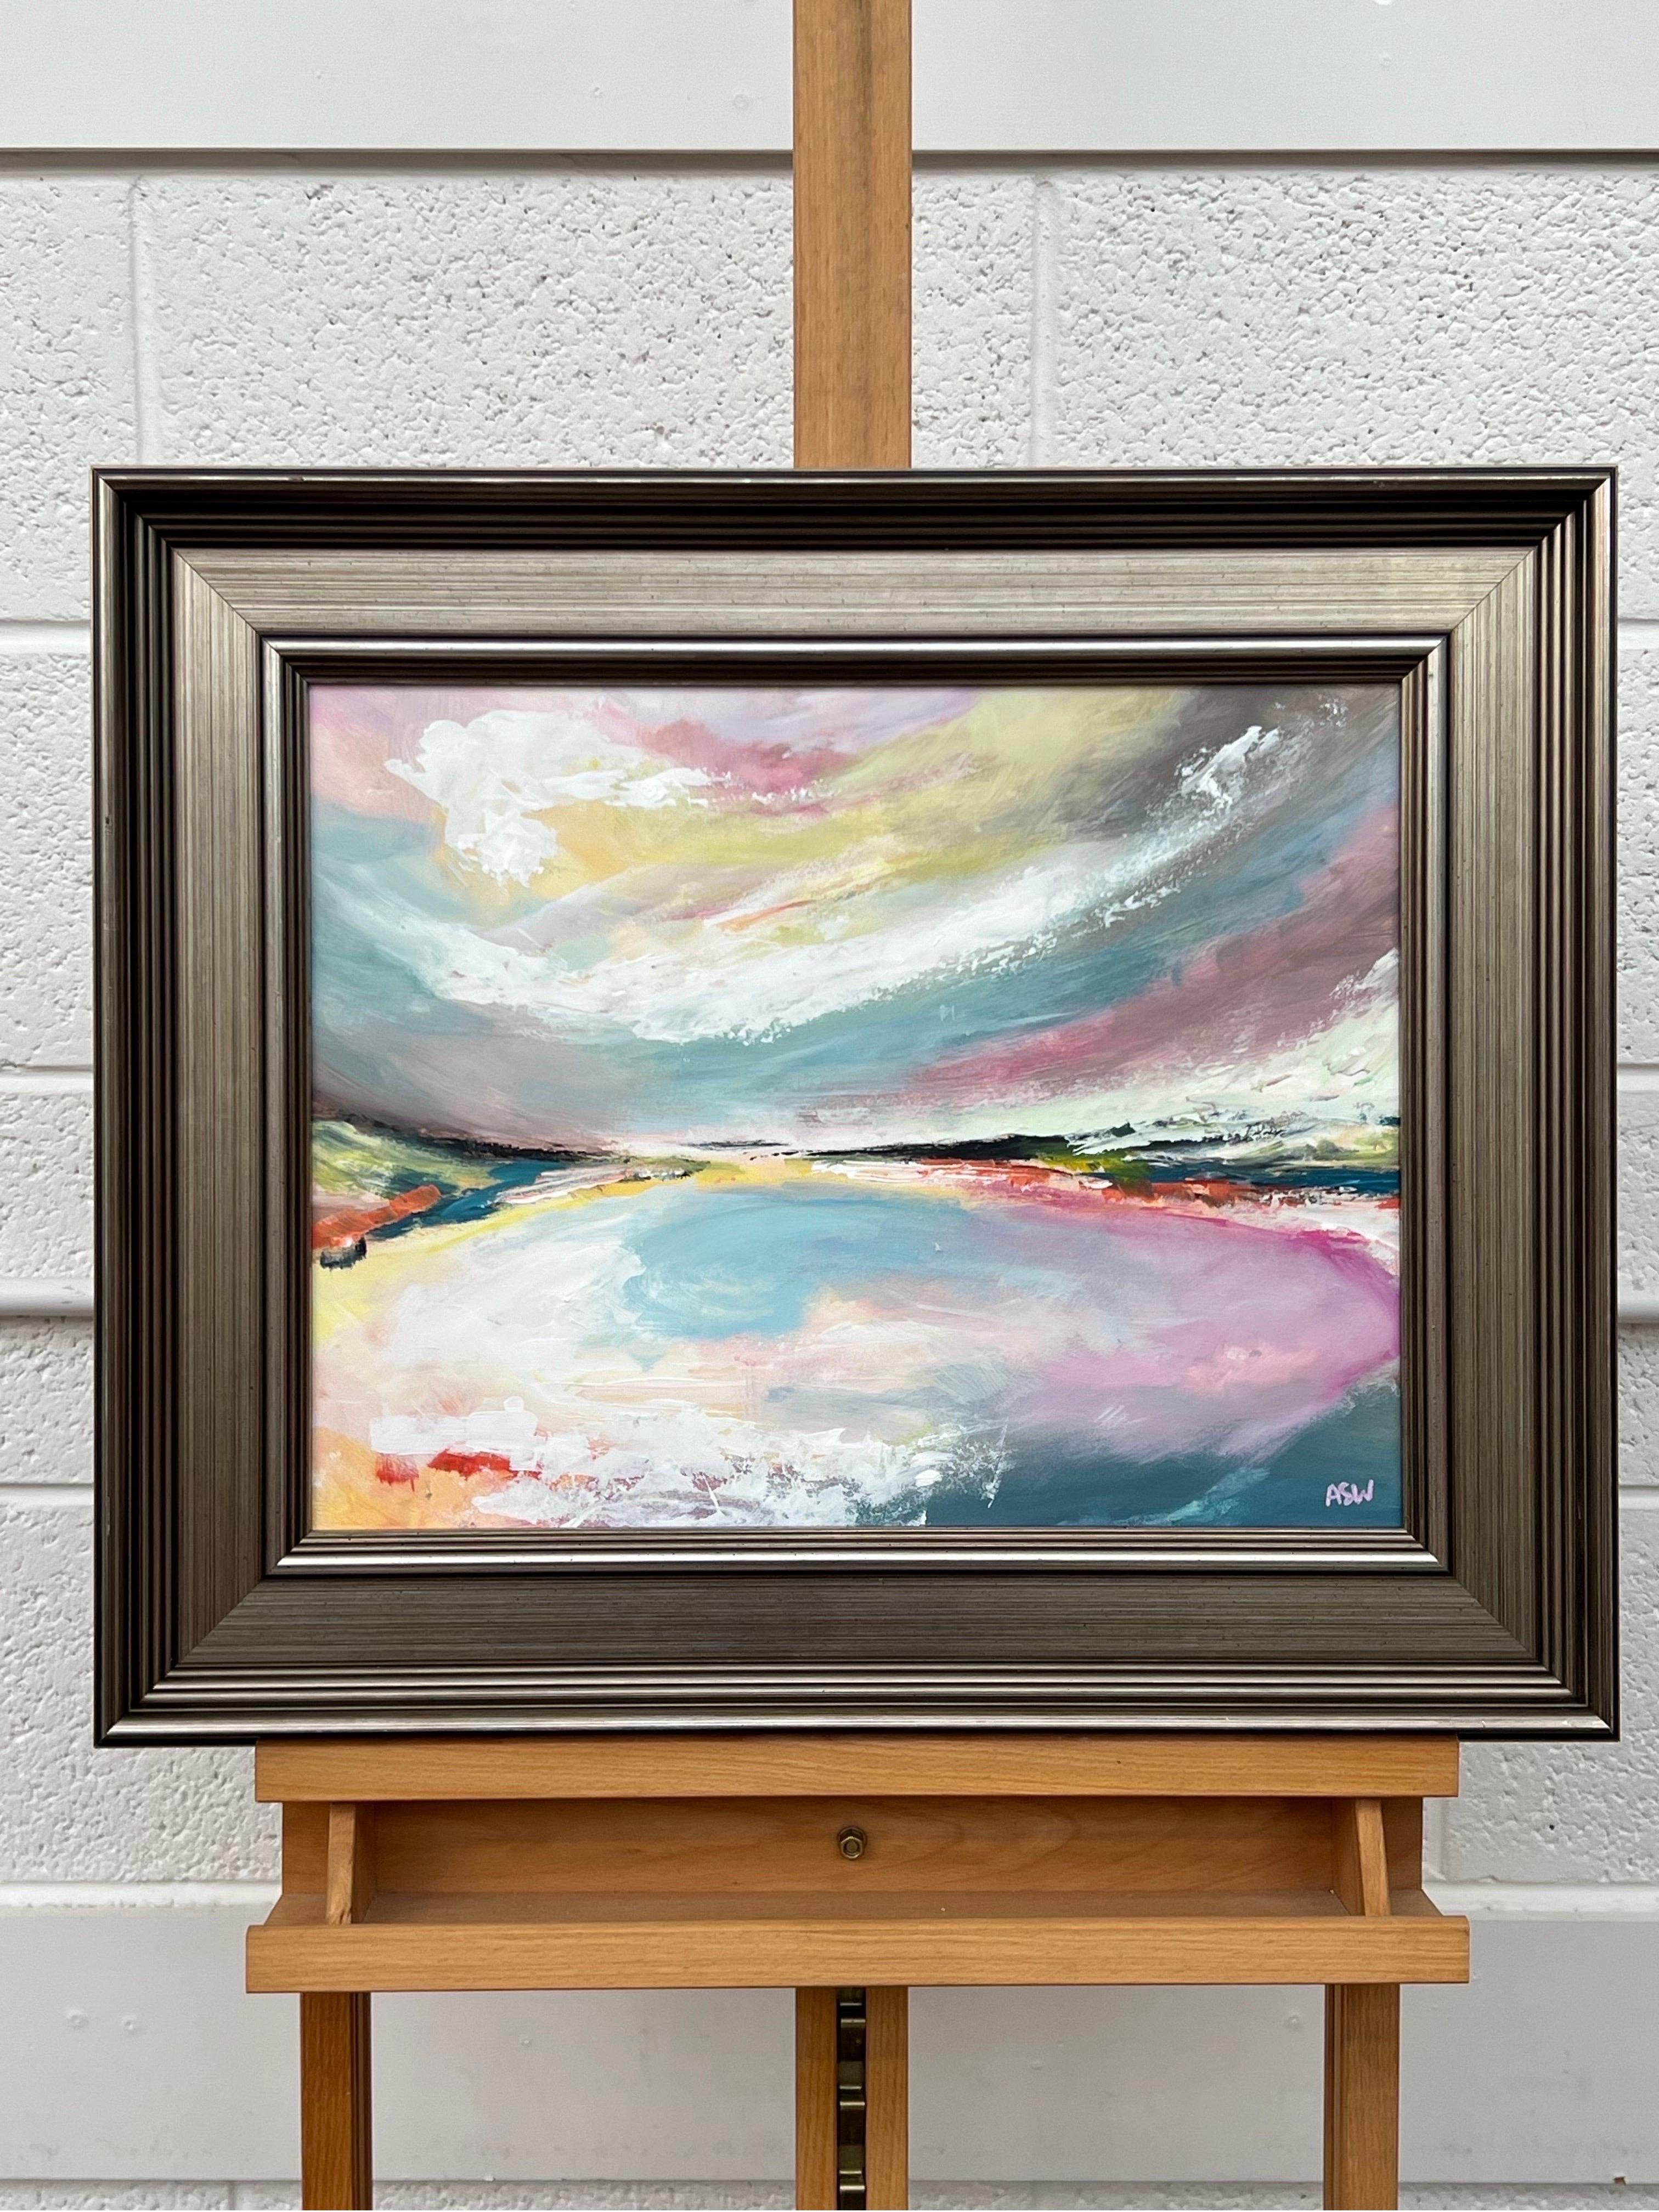 Abstract Landscape Seascape Art with Pink Blue & White Sky by British Artist For Sale 2